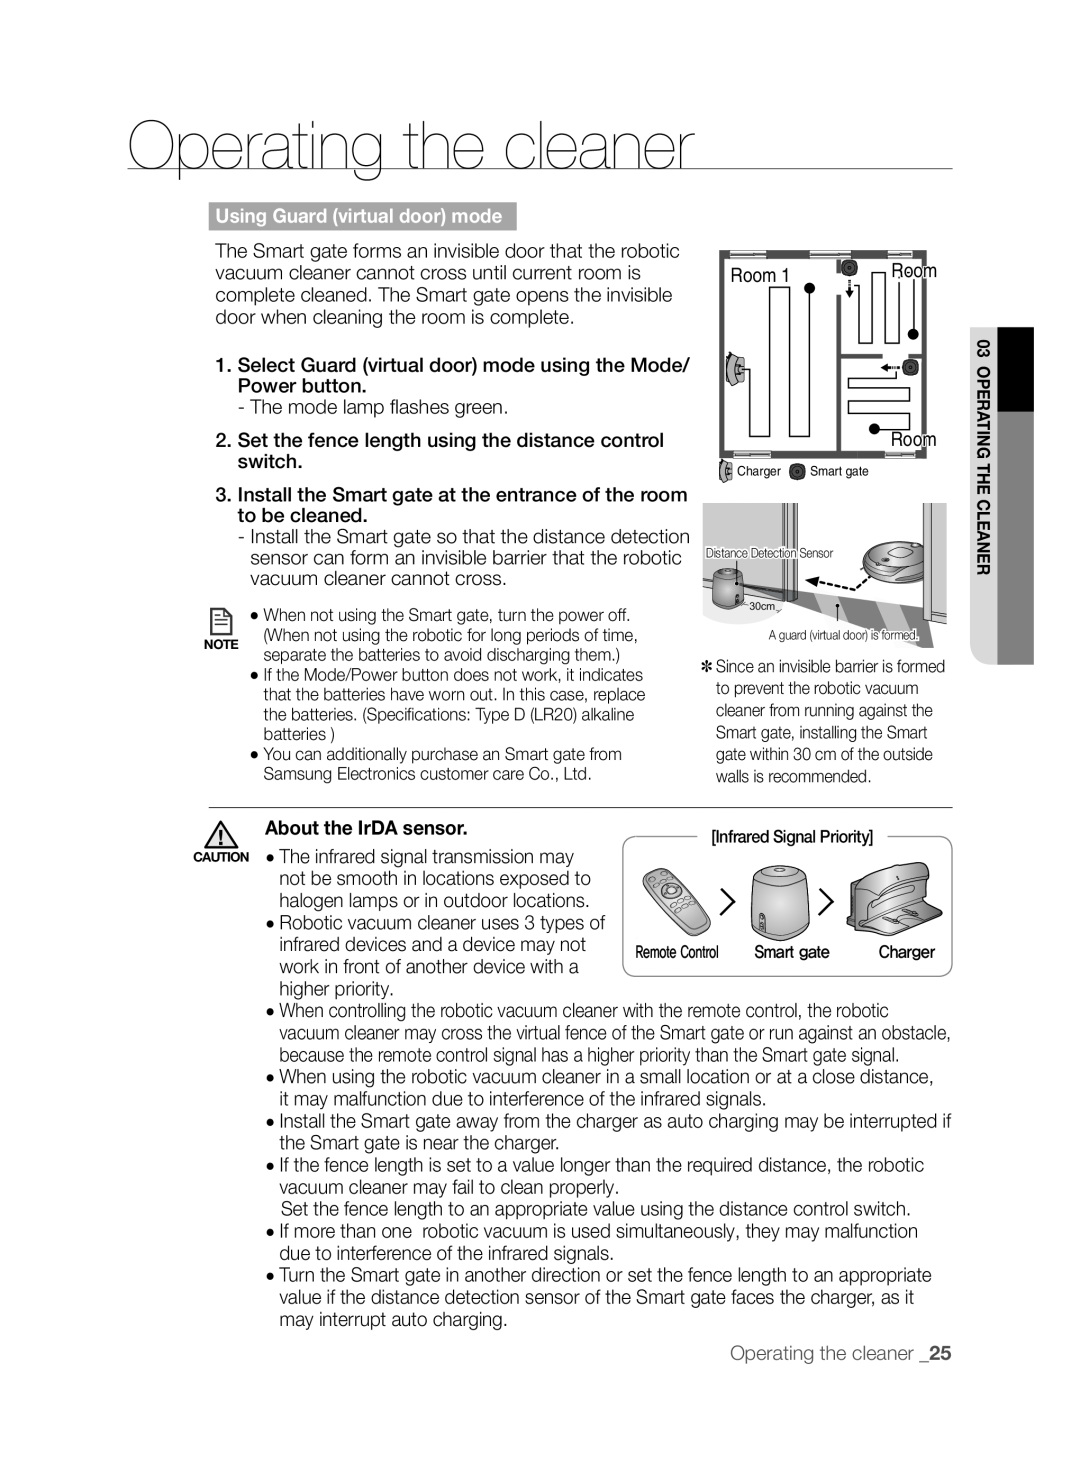 Samsung SR8830, VCR8830T1R, DJ68-00518A user manual Using Guard virtual door mode, Room, Operating the cleaner _25 